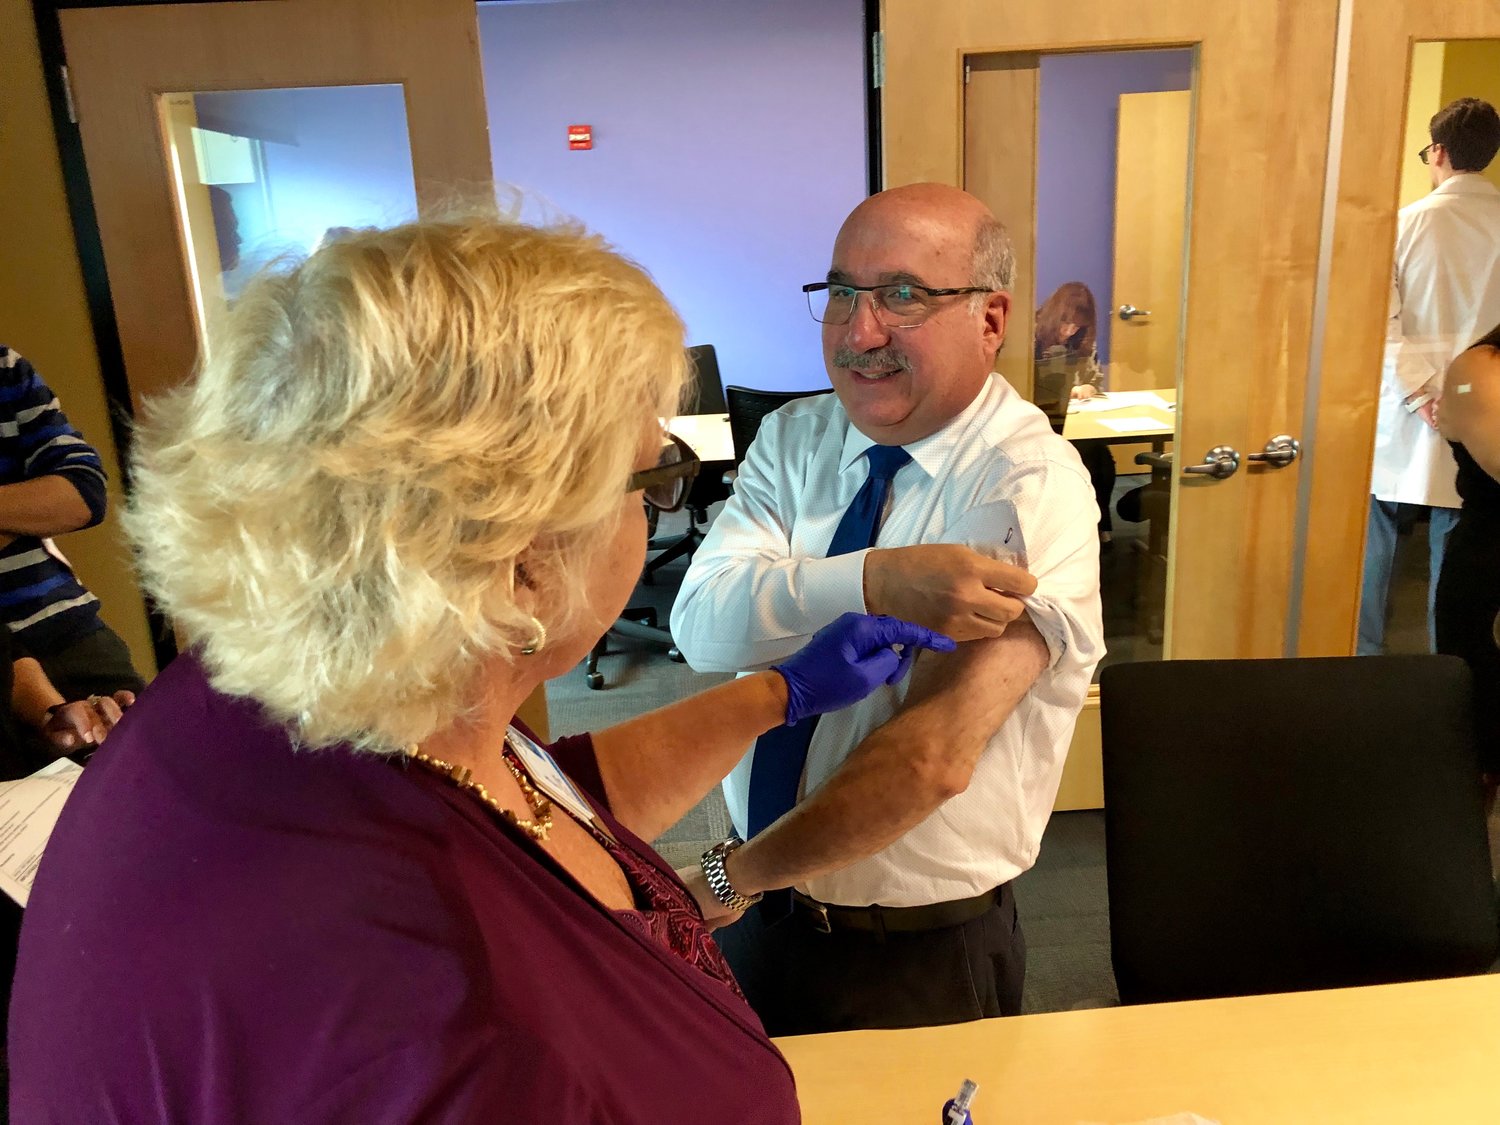 Marty Goldenberg, advertising sales account executive for the Rockville Centre Herald, received his shot from Kate Zummo, MSSN director of community education and a registered nurse.